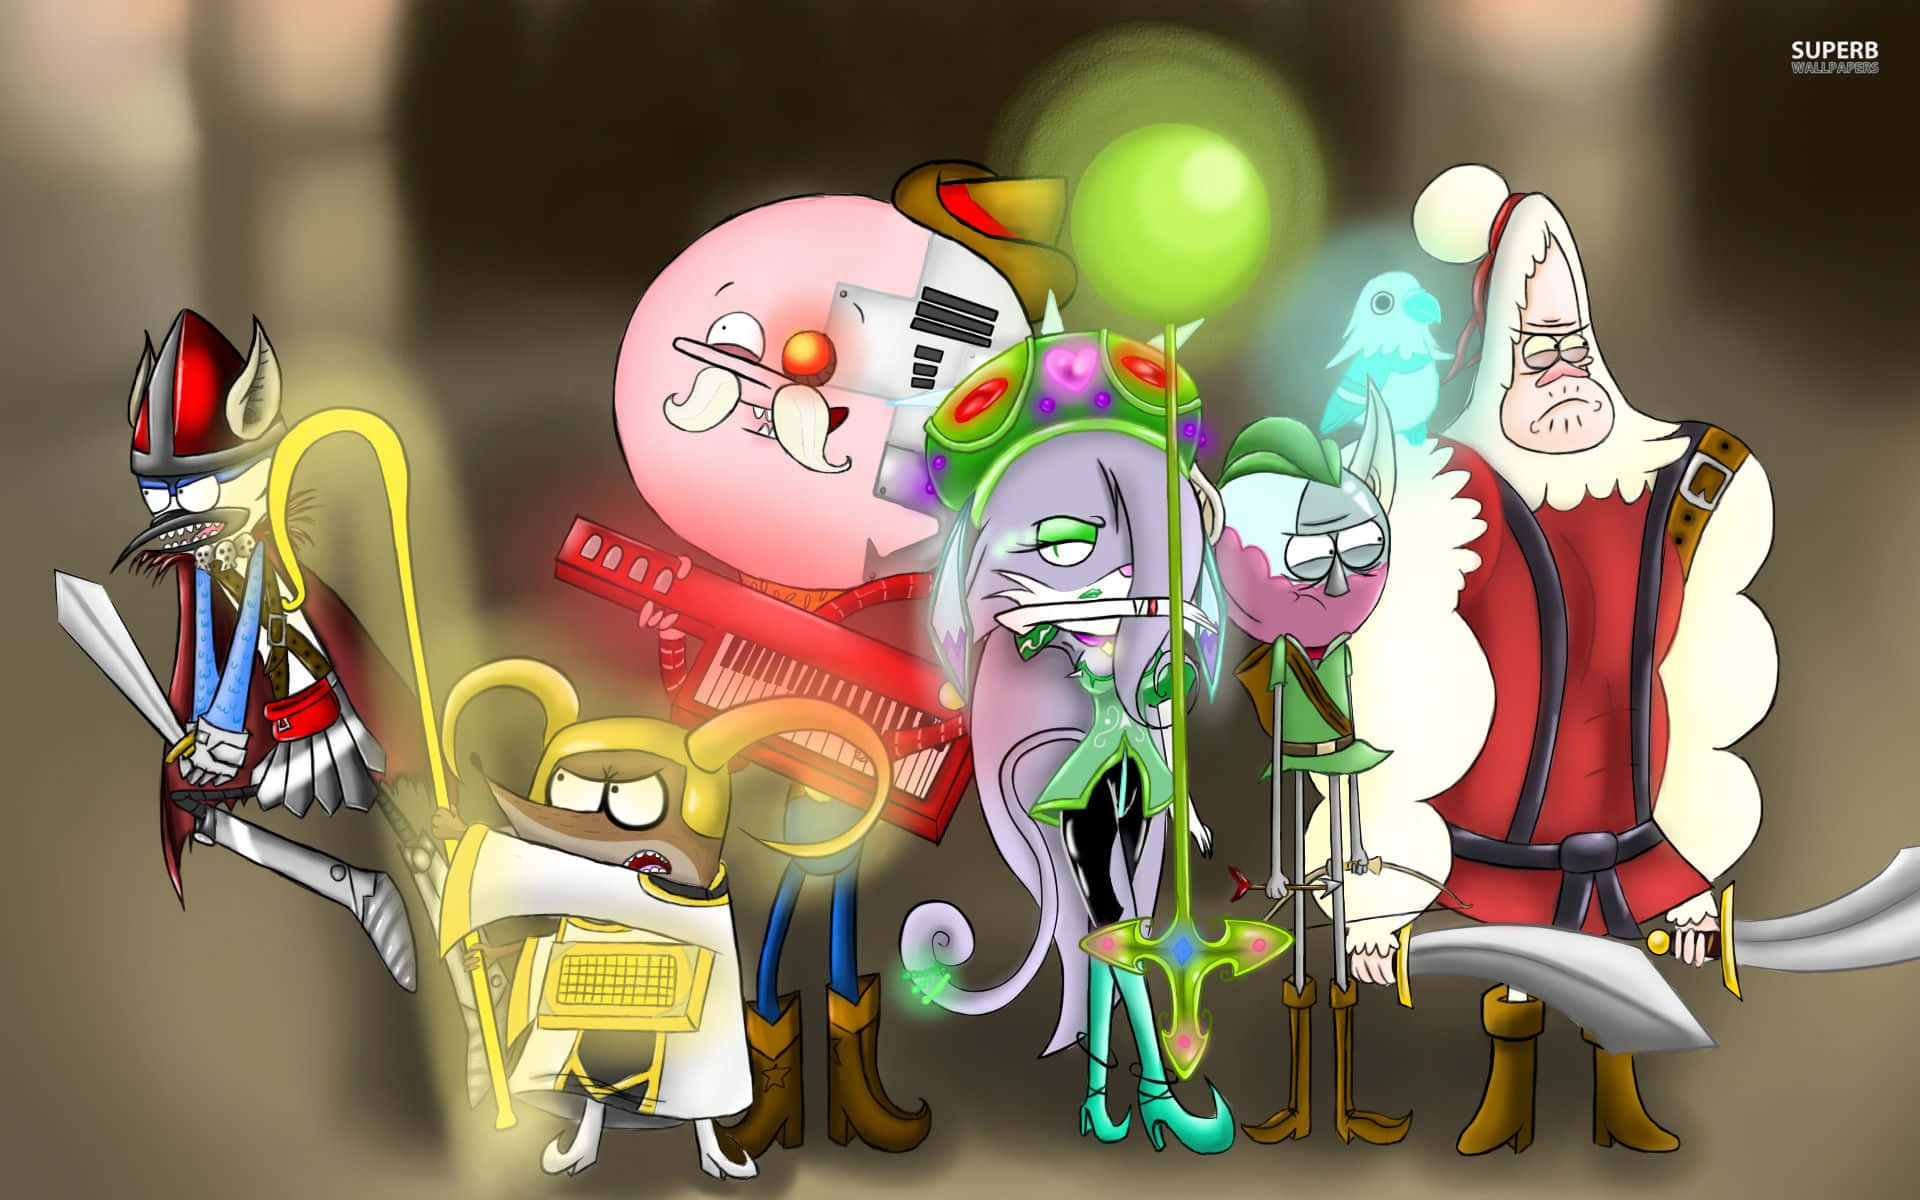 Regular Show's beloved characters in an electrifying scene